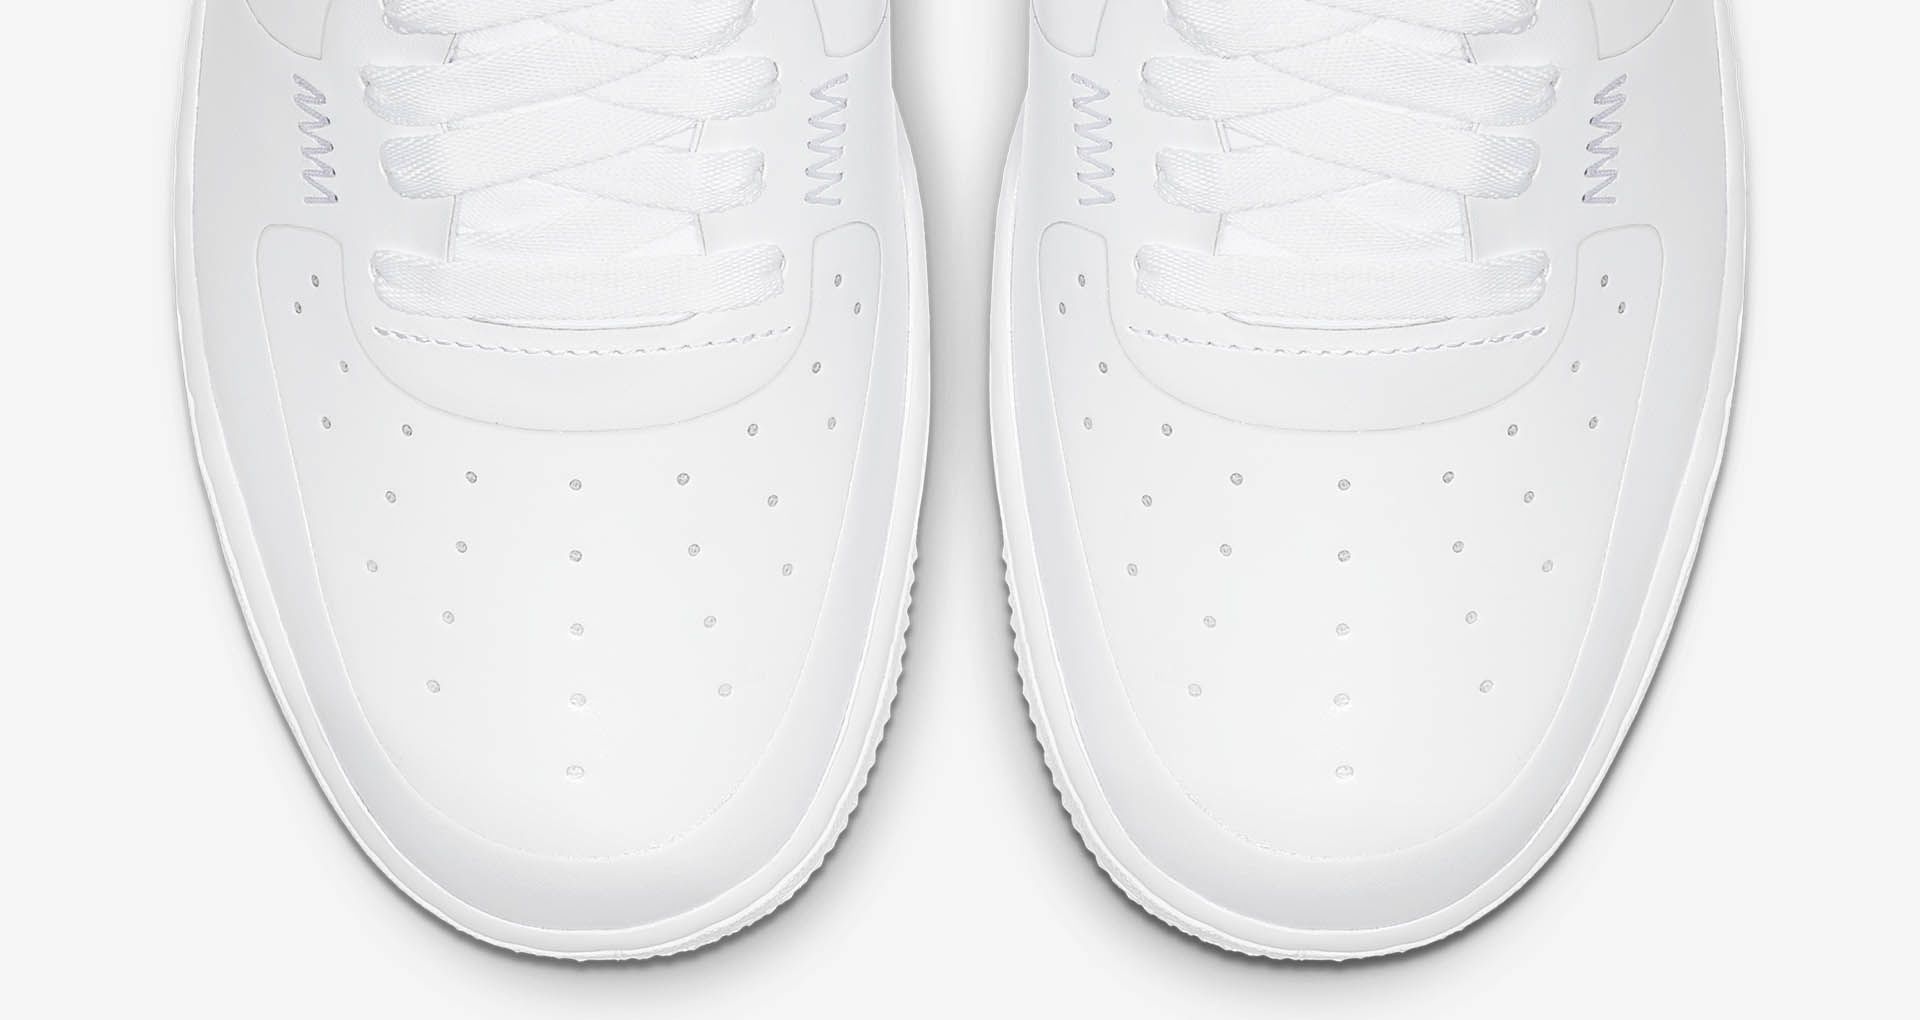 Nike Air Force 1 Low 'Noise Cancelling White' Release Date. Nike SNKRS